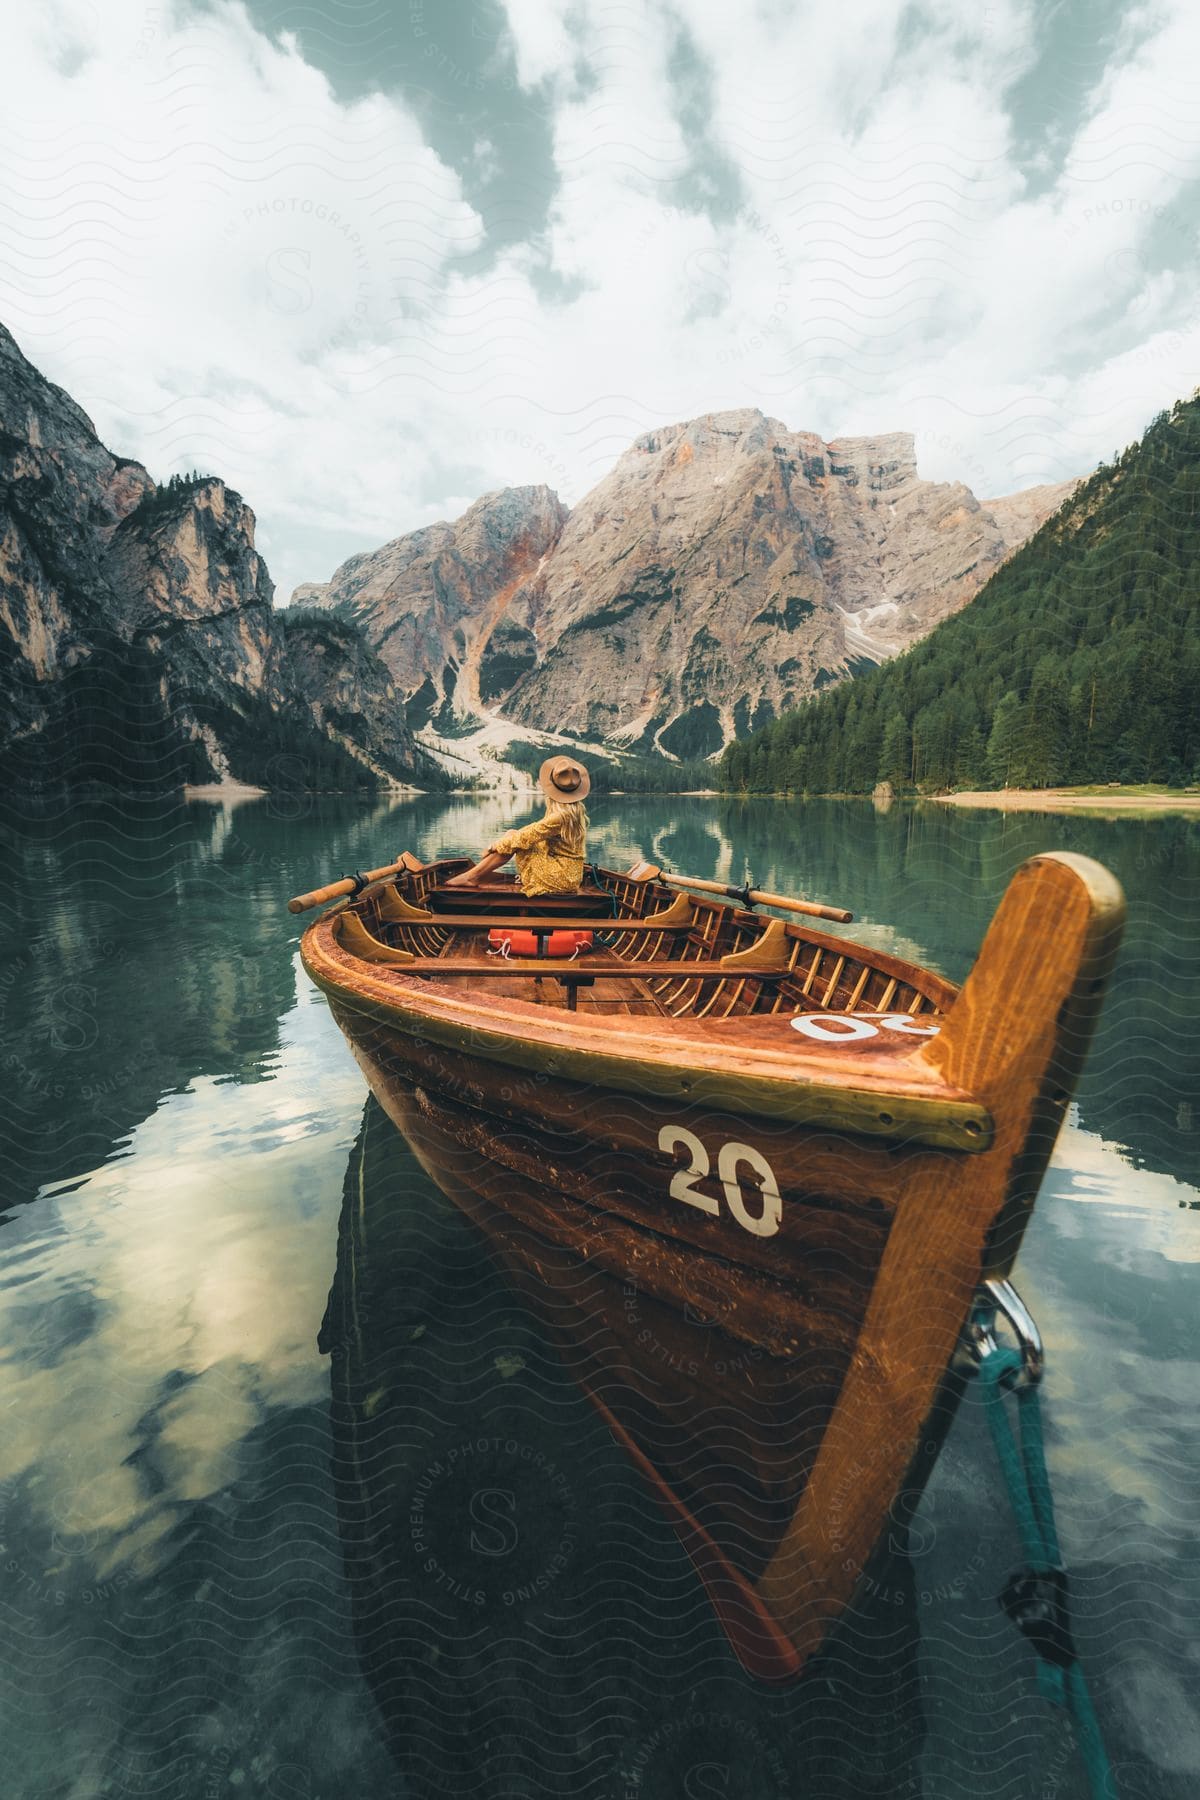 Lake with a canoe and a woman sitting with a beautiful view of mountains and conifers around